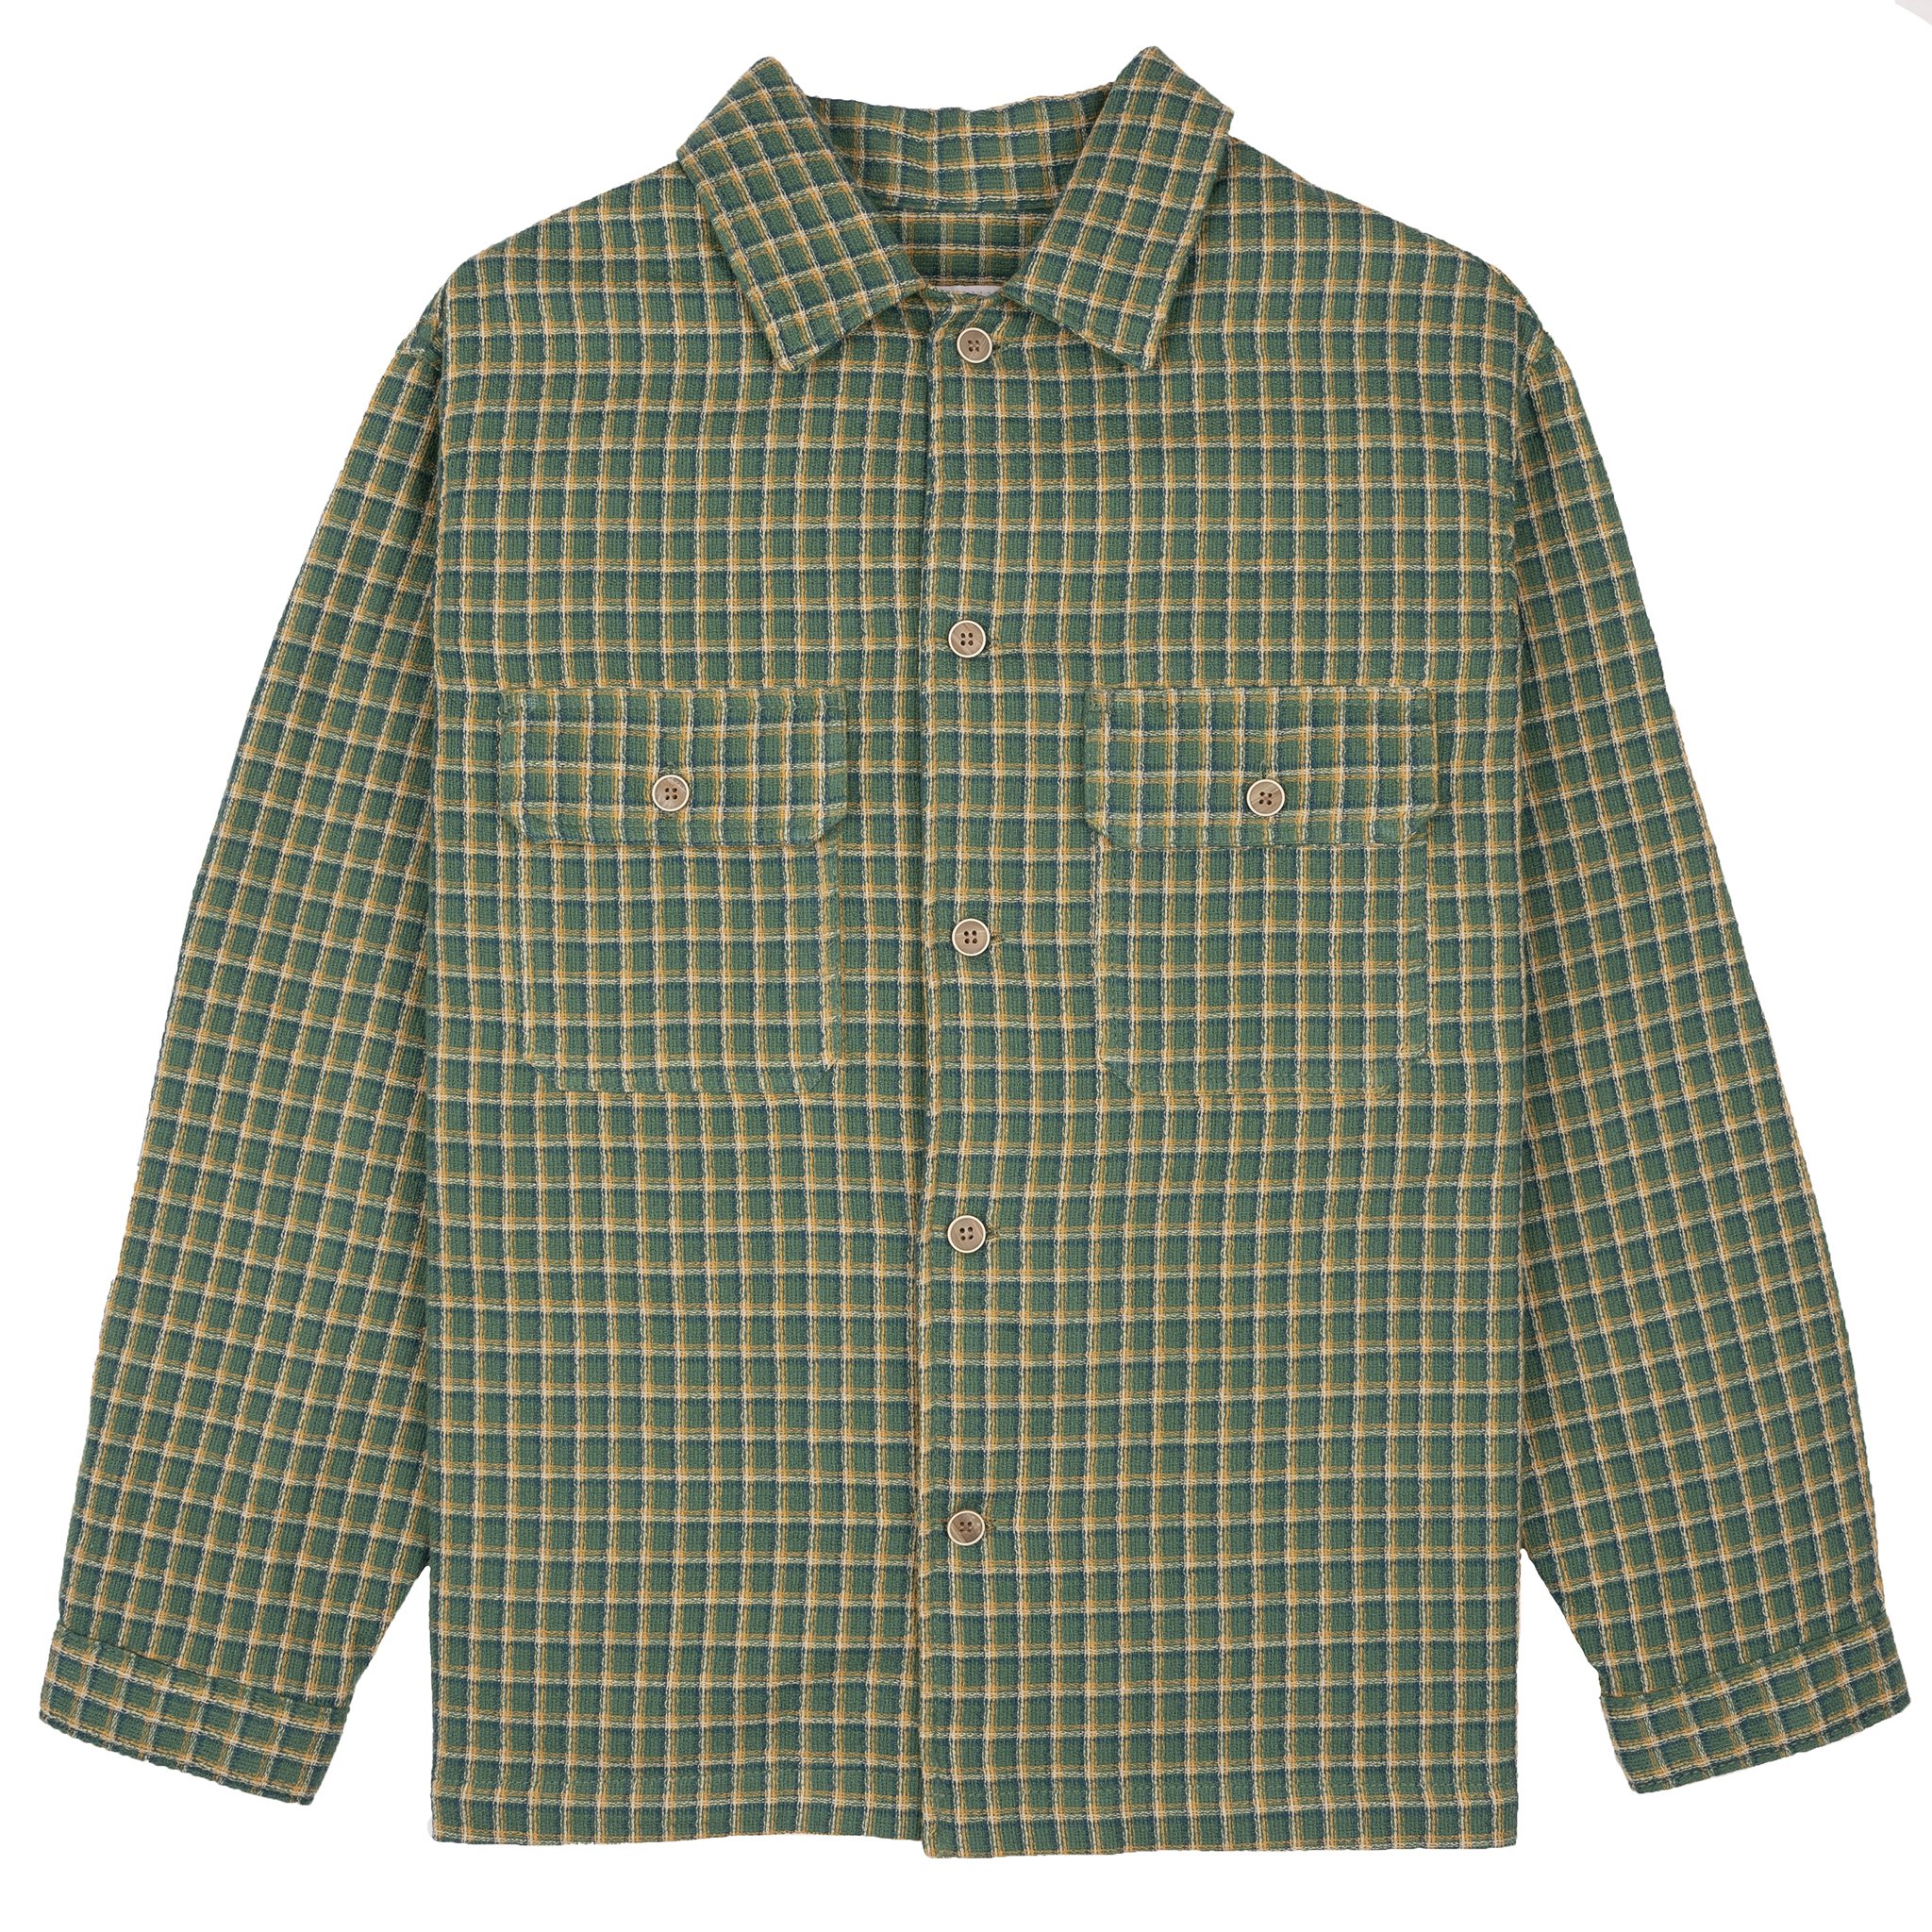  Over Shirt - Yarn Dyed Double Cloth - Green 